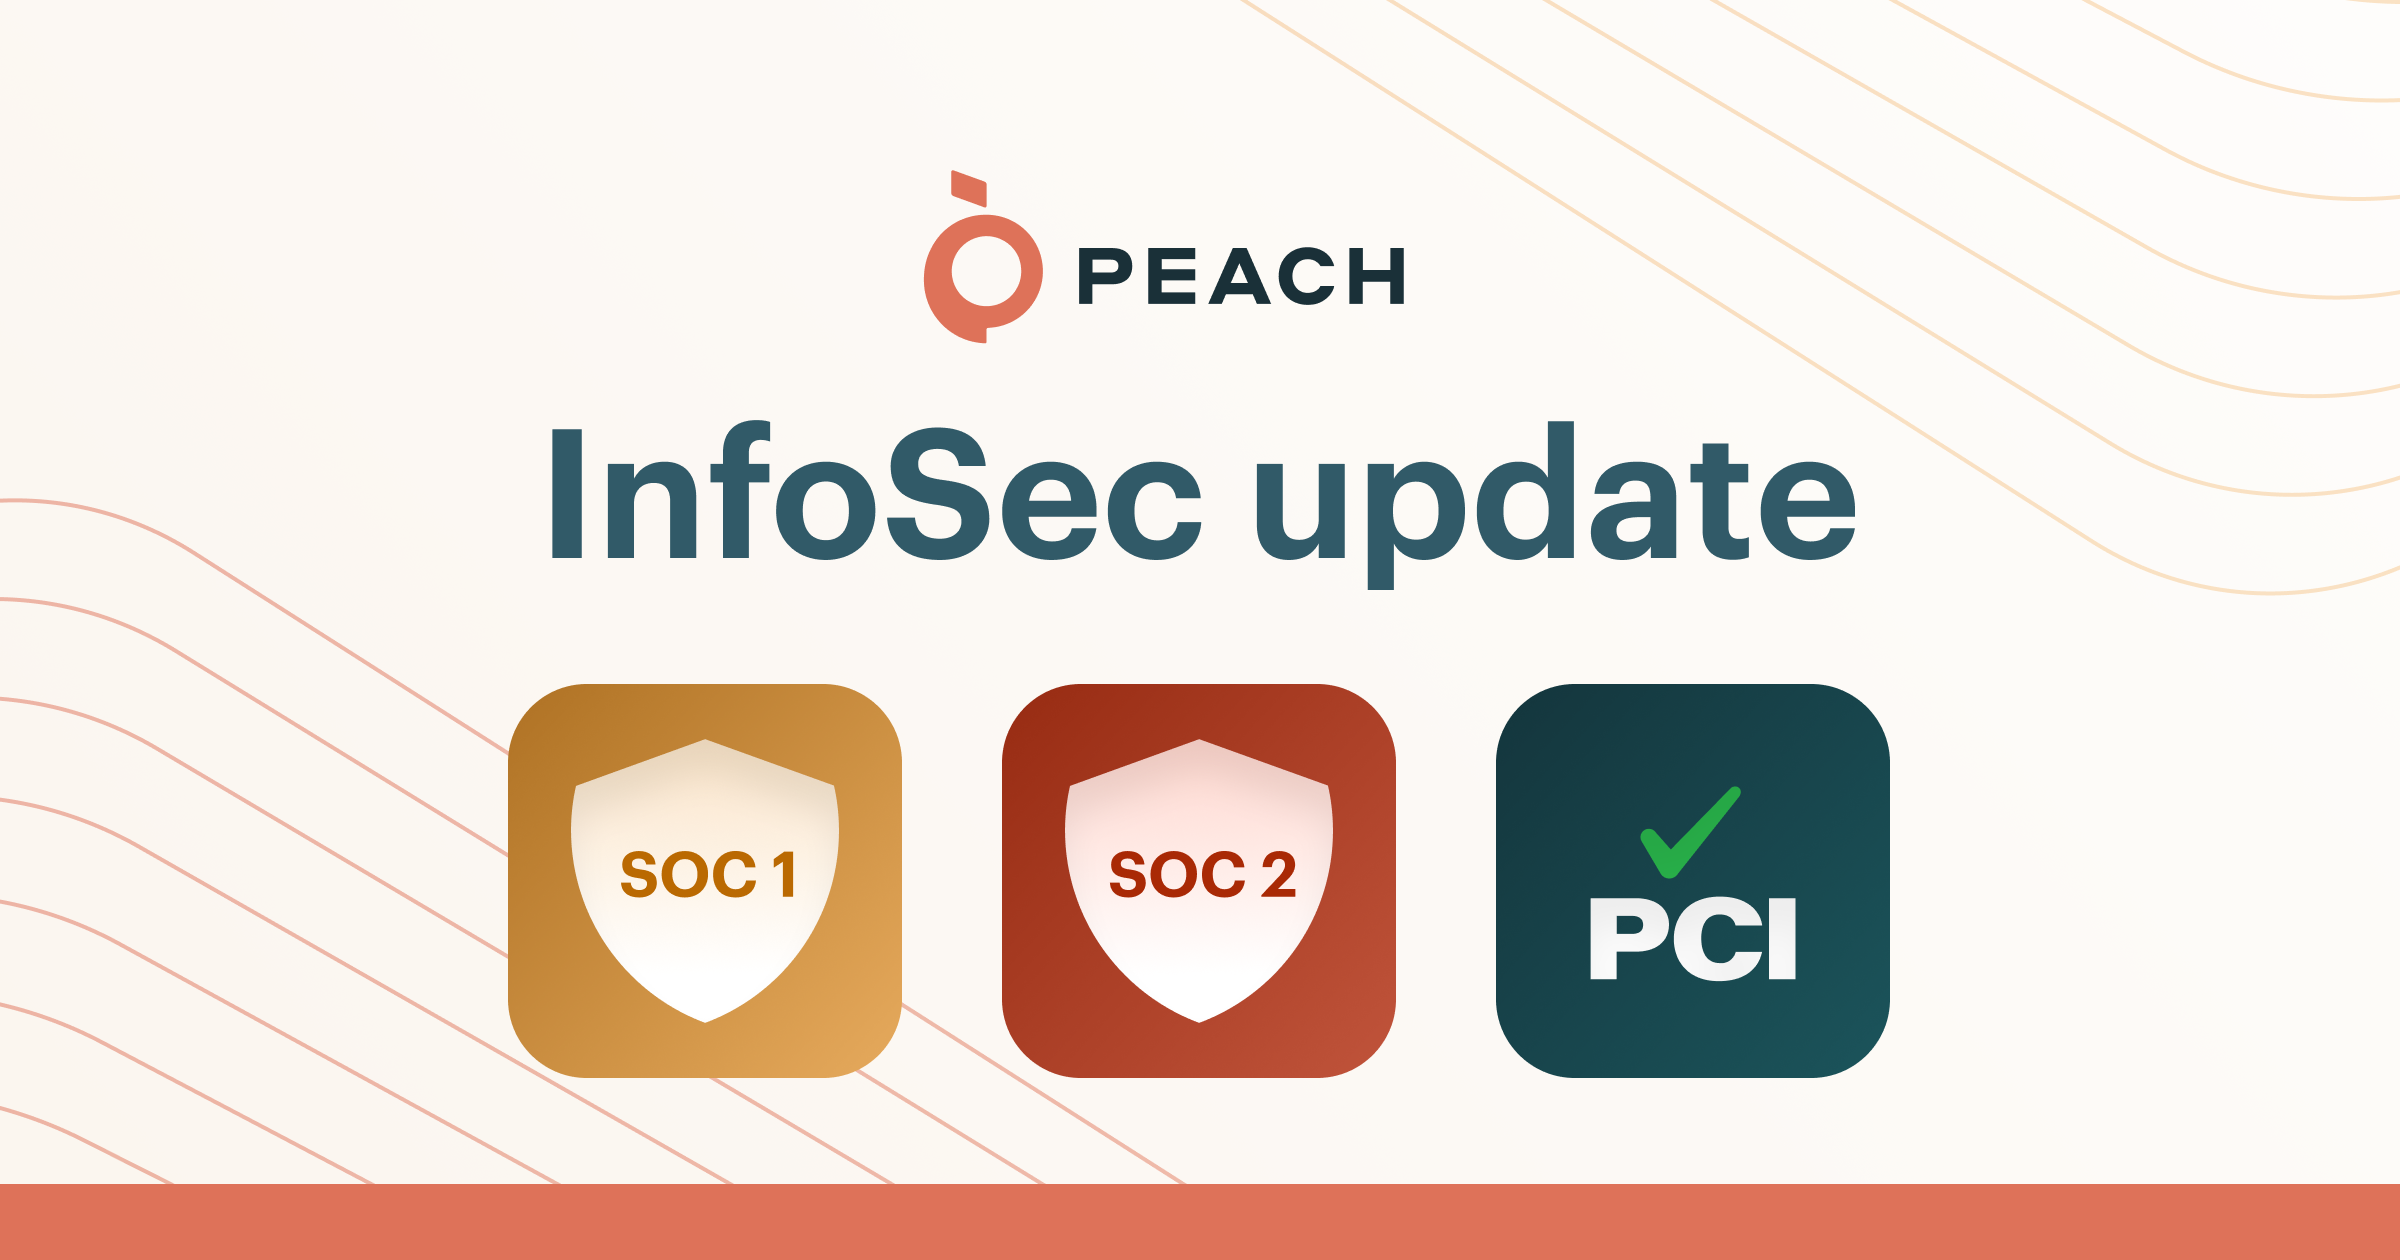 Peach's platform is certified compliant with SOC 1, SOC 2 and PCI DSS